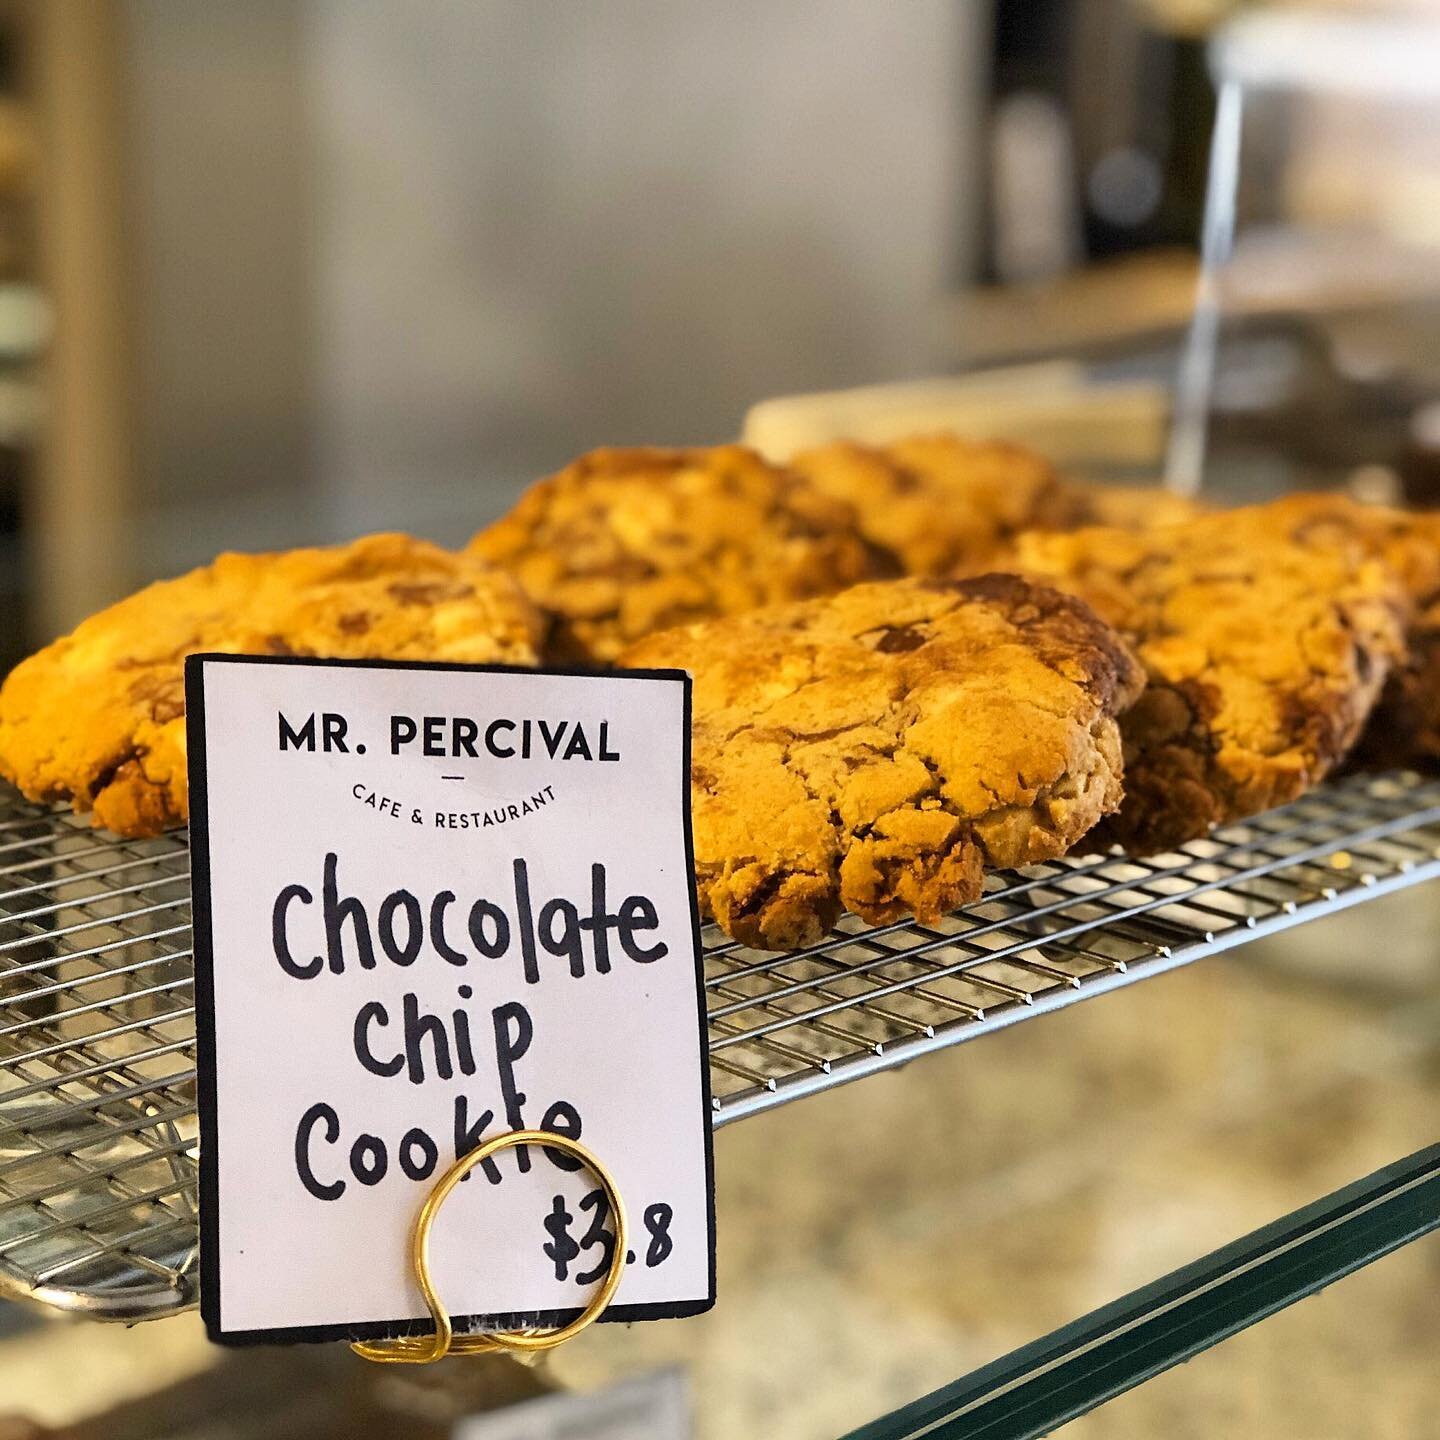 We know just the thing to sweeten up a gloomy Wednesday... our house favourite choc chip cookies 🤤🍪 Open til 3pm! 
#mrpercivalcafe #albertparklake #supportlocal